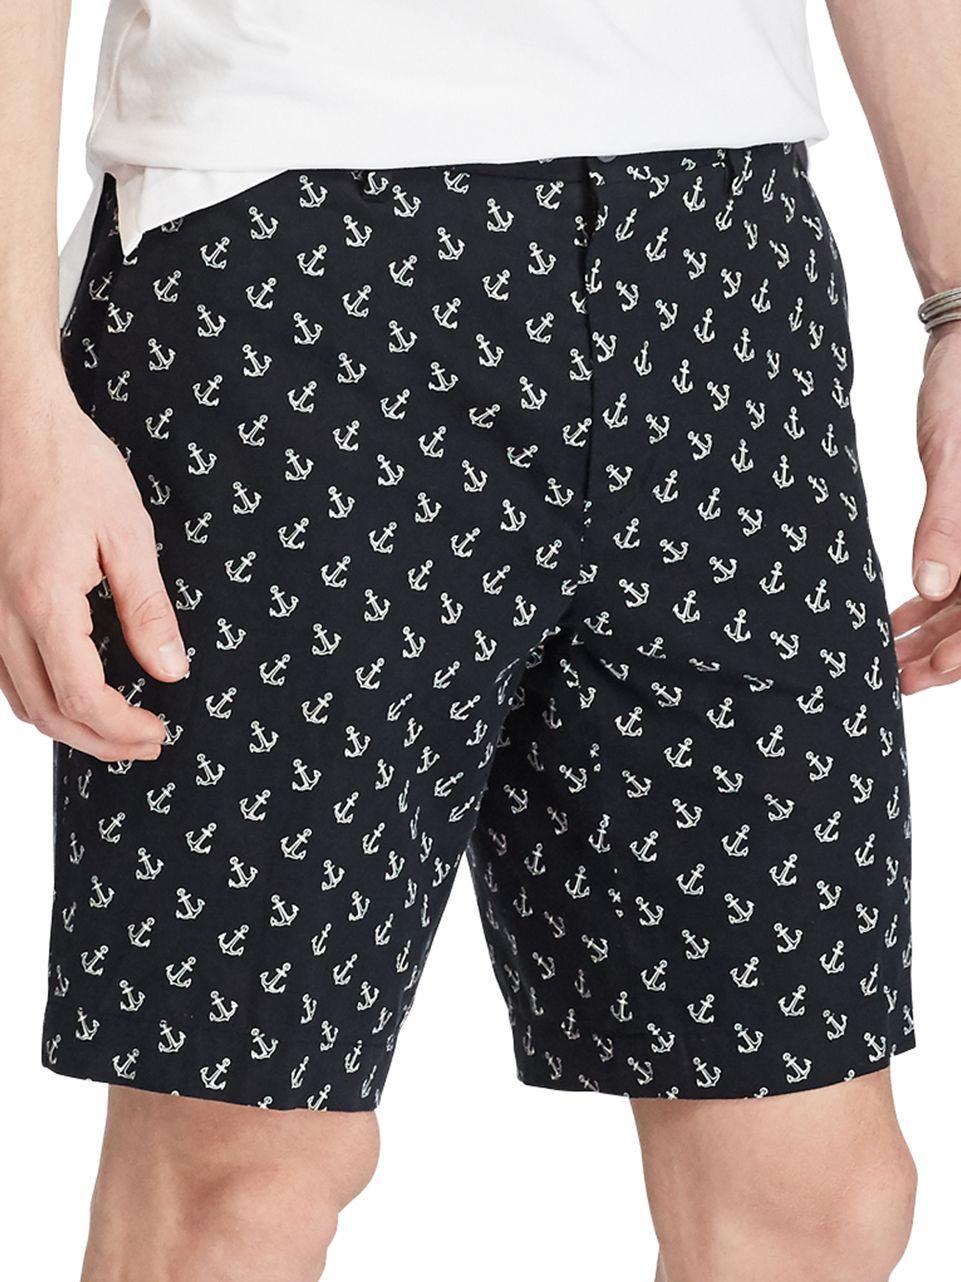 Lyst - Polo Ralph Lauren Newports Tossed Anchors Flat Shorts in Black ...